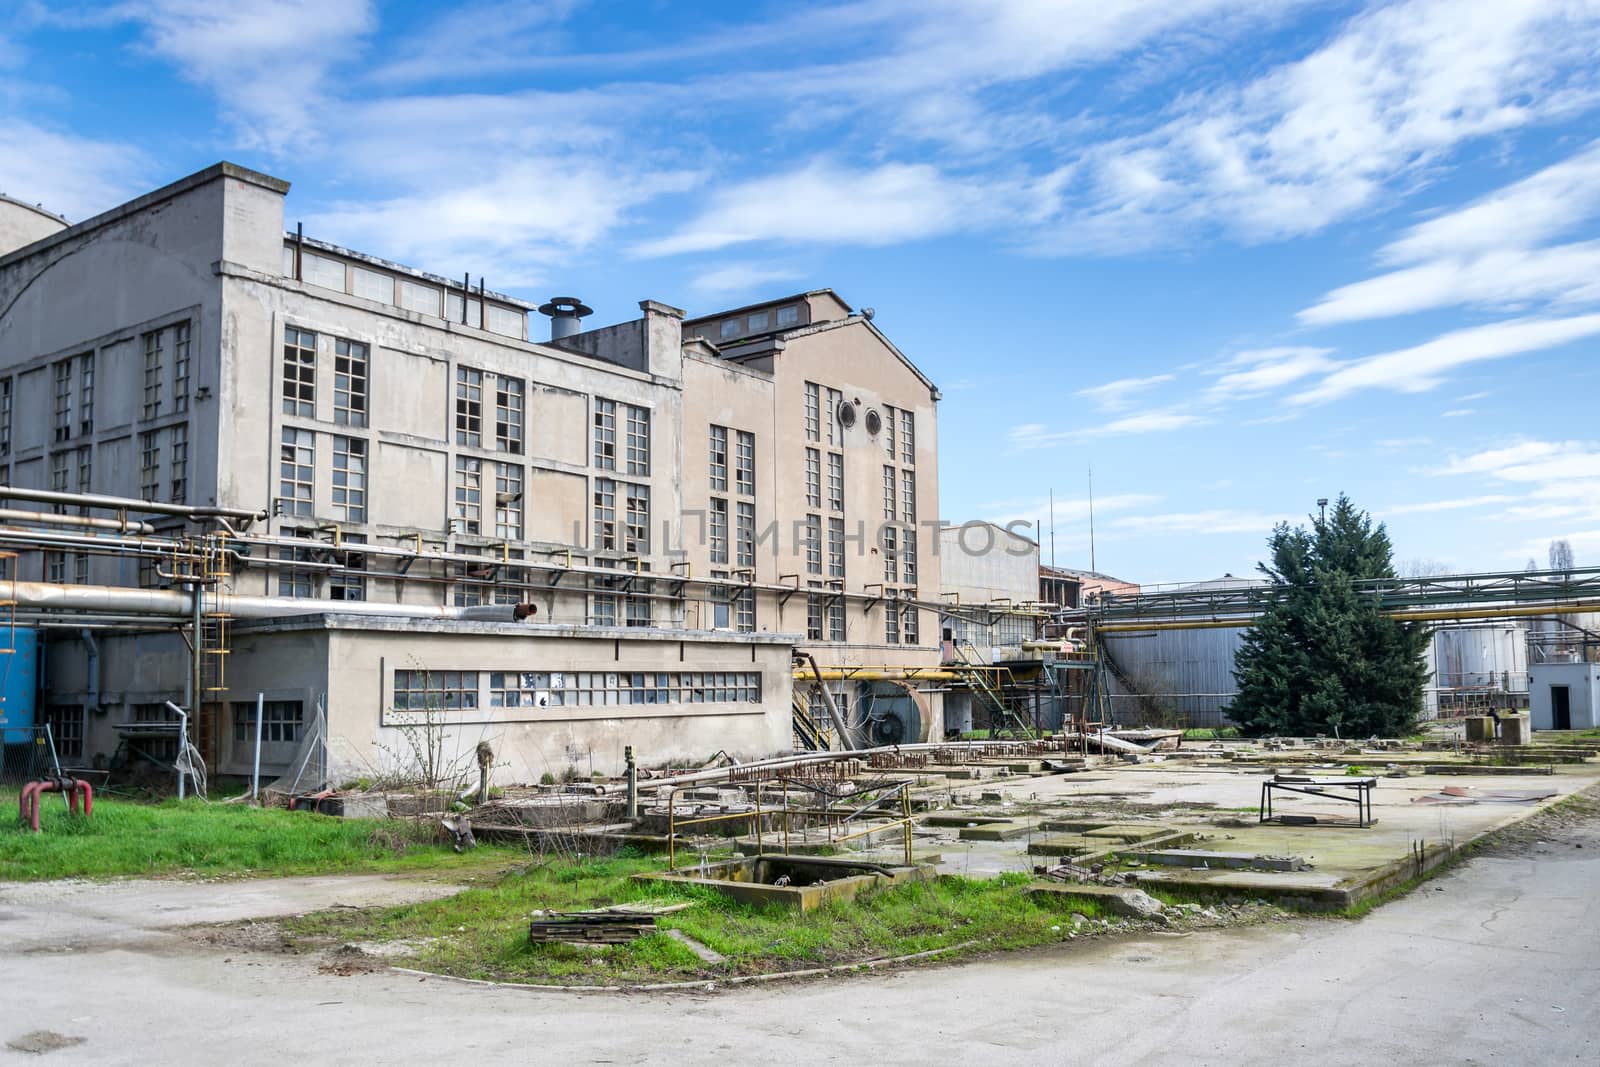 Buildings of an abandoned distillery in Italy